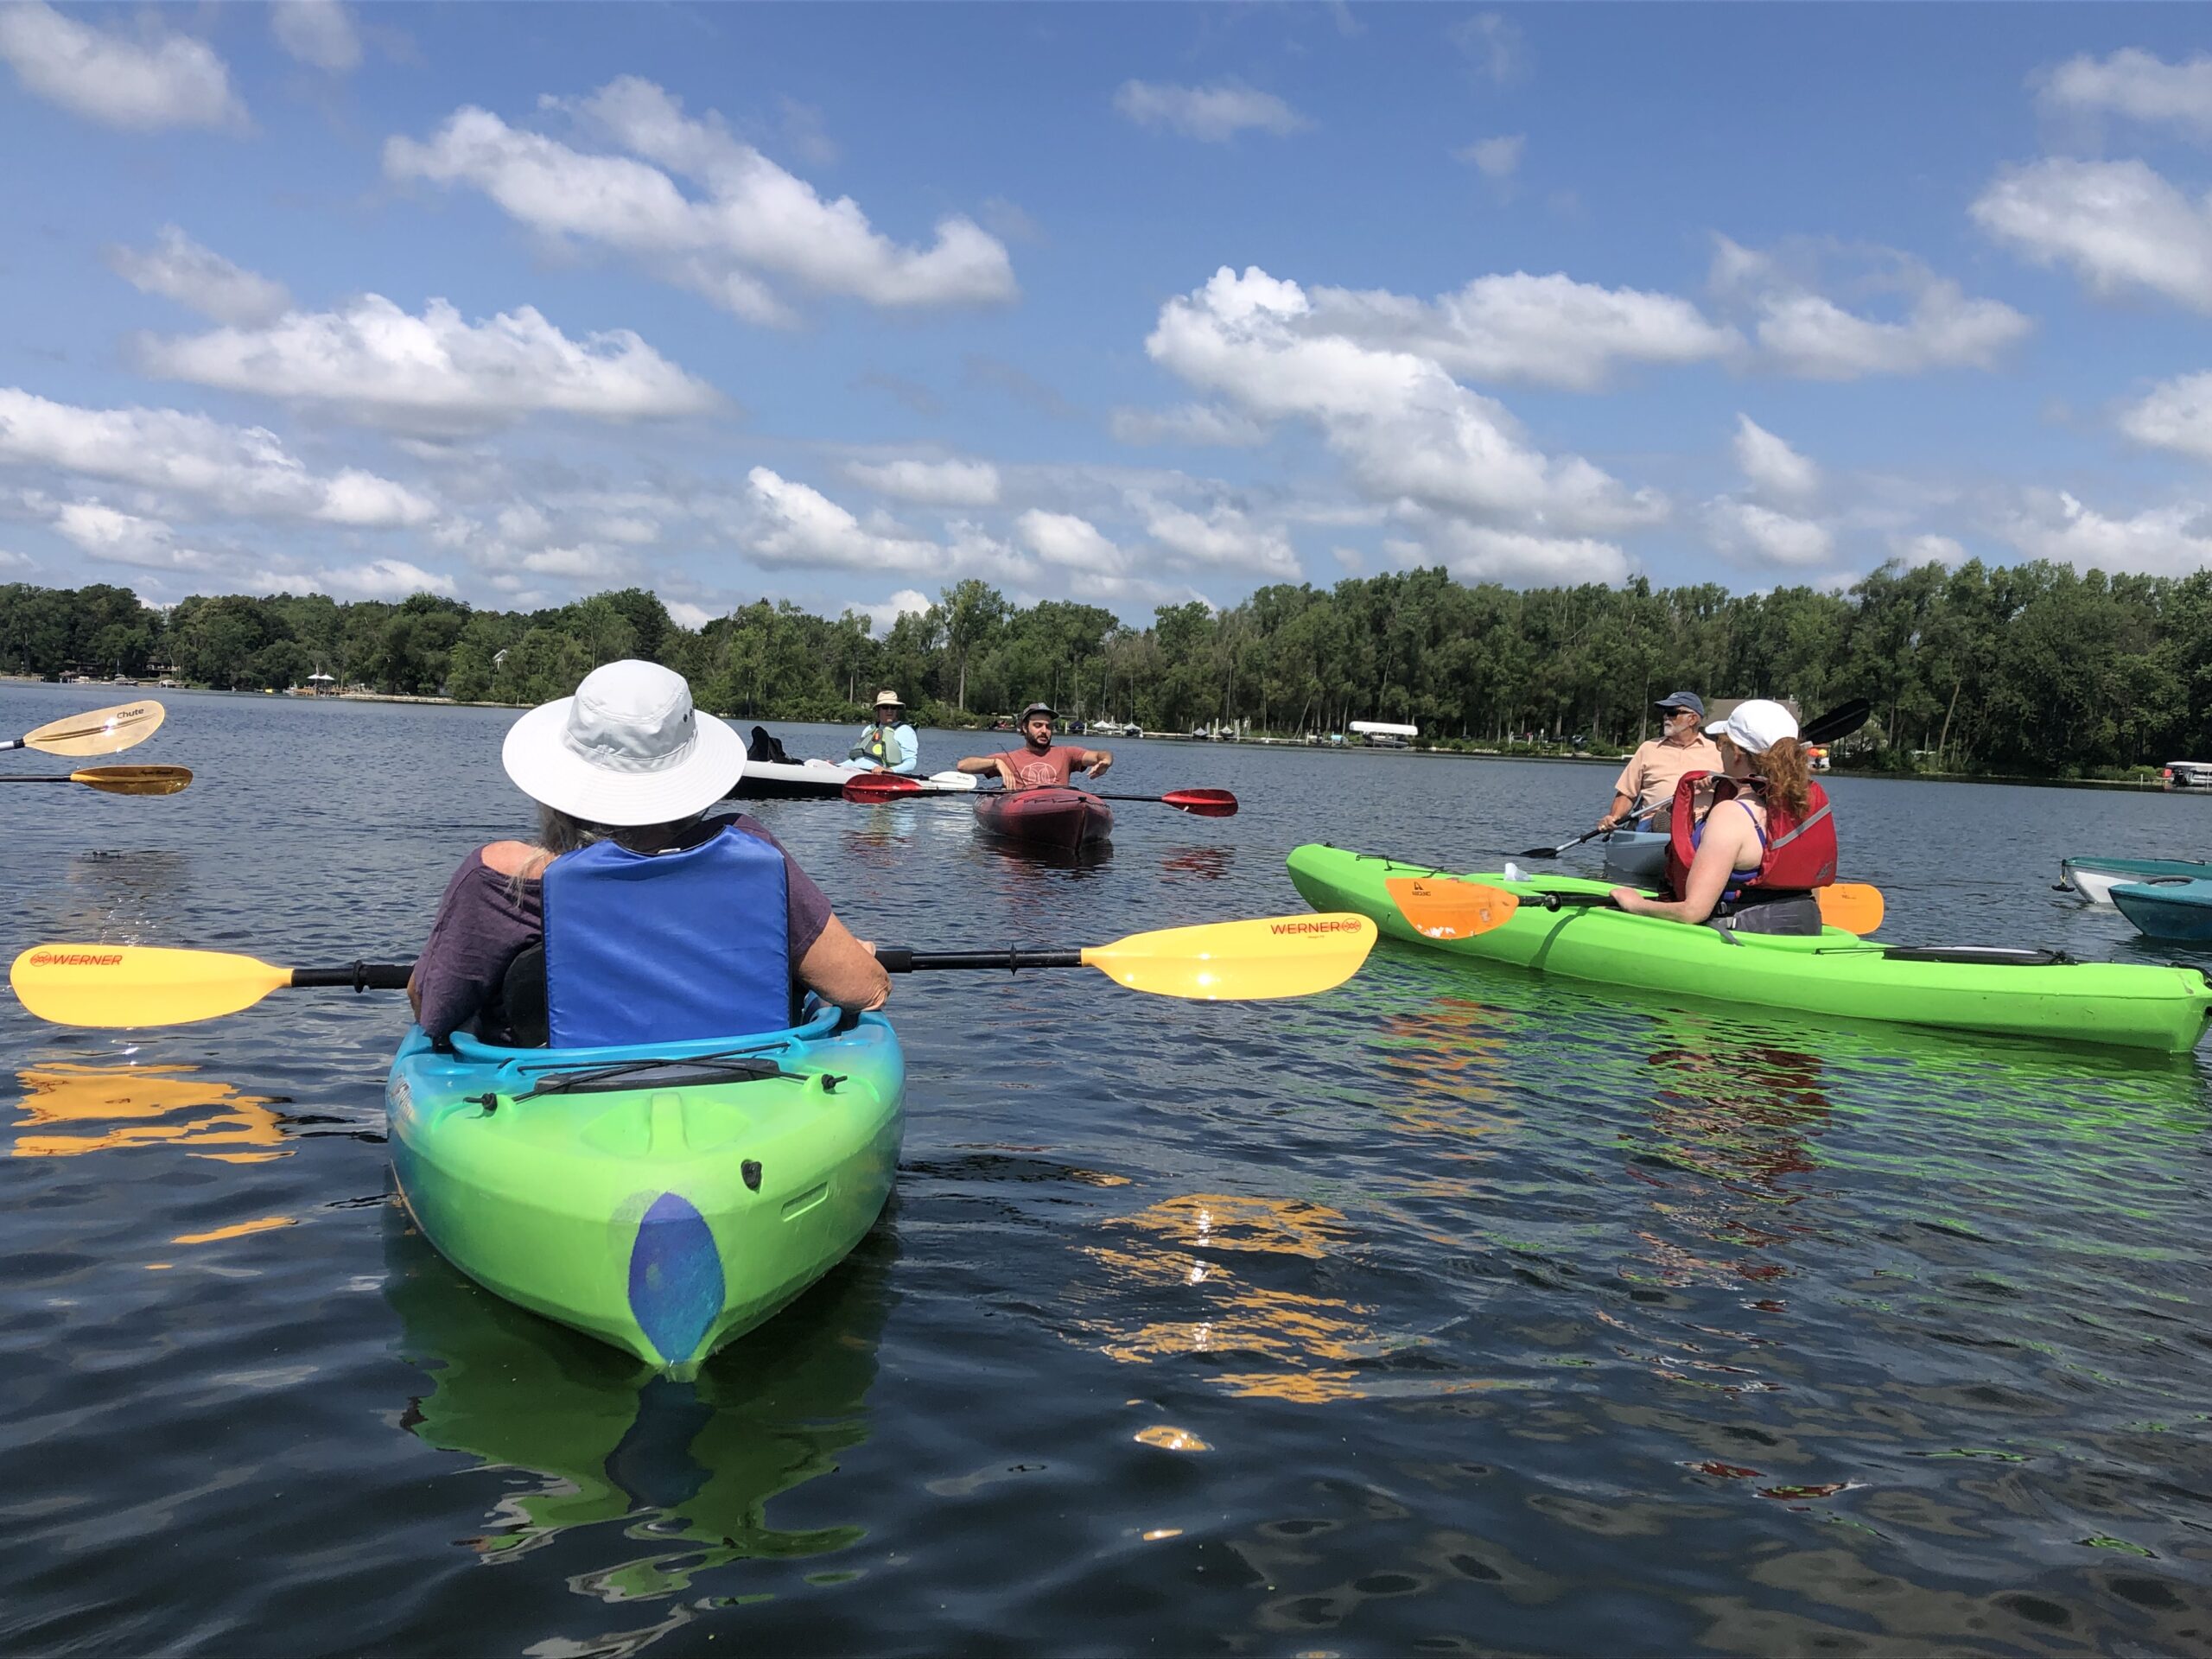 Several people in brightly colored canoes and kayaks on a Wisconsin lake.